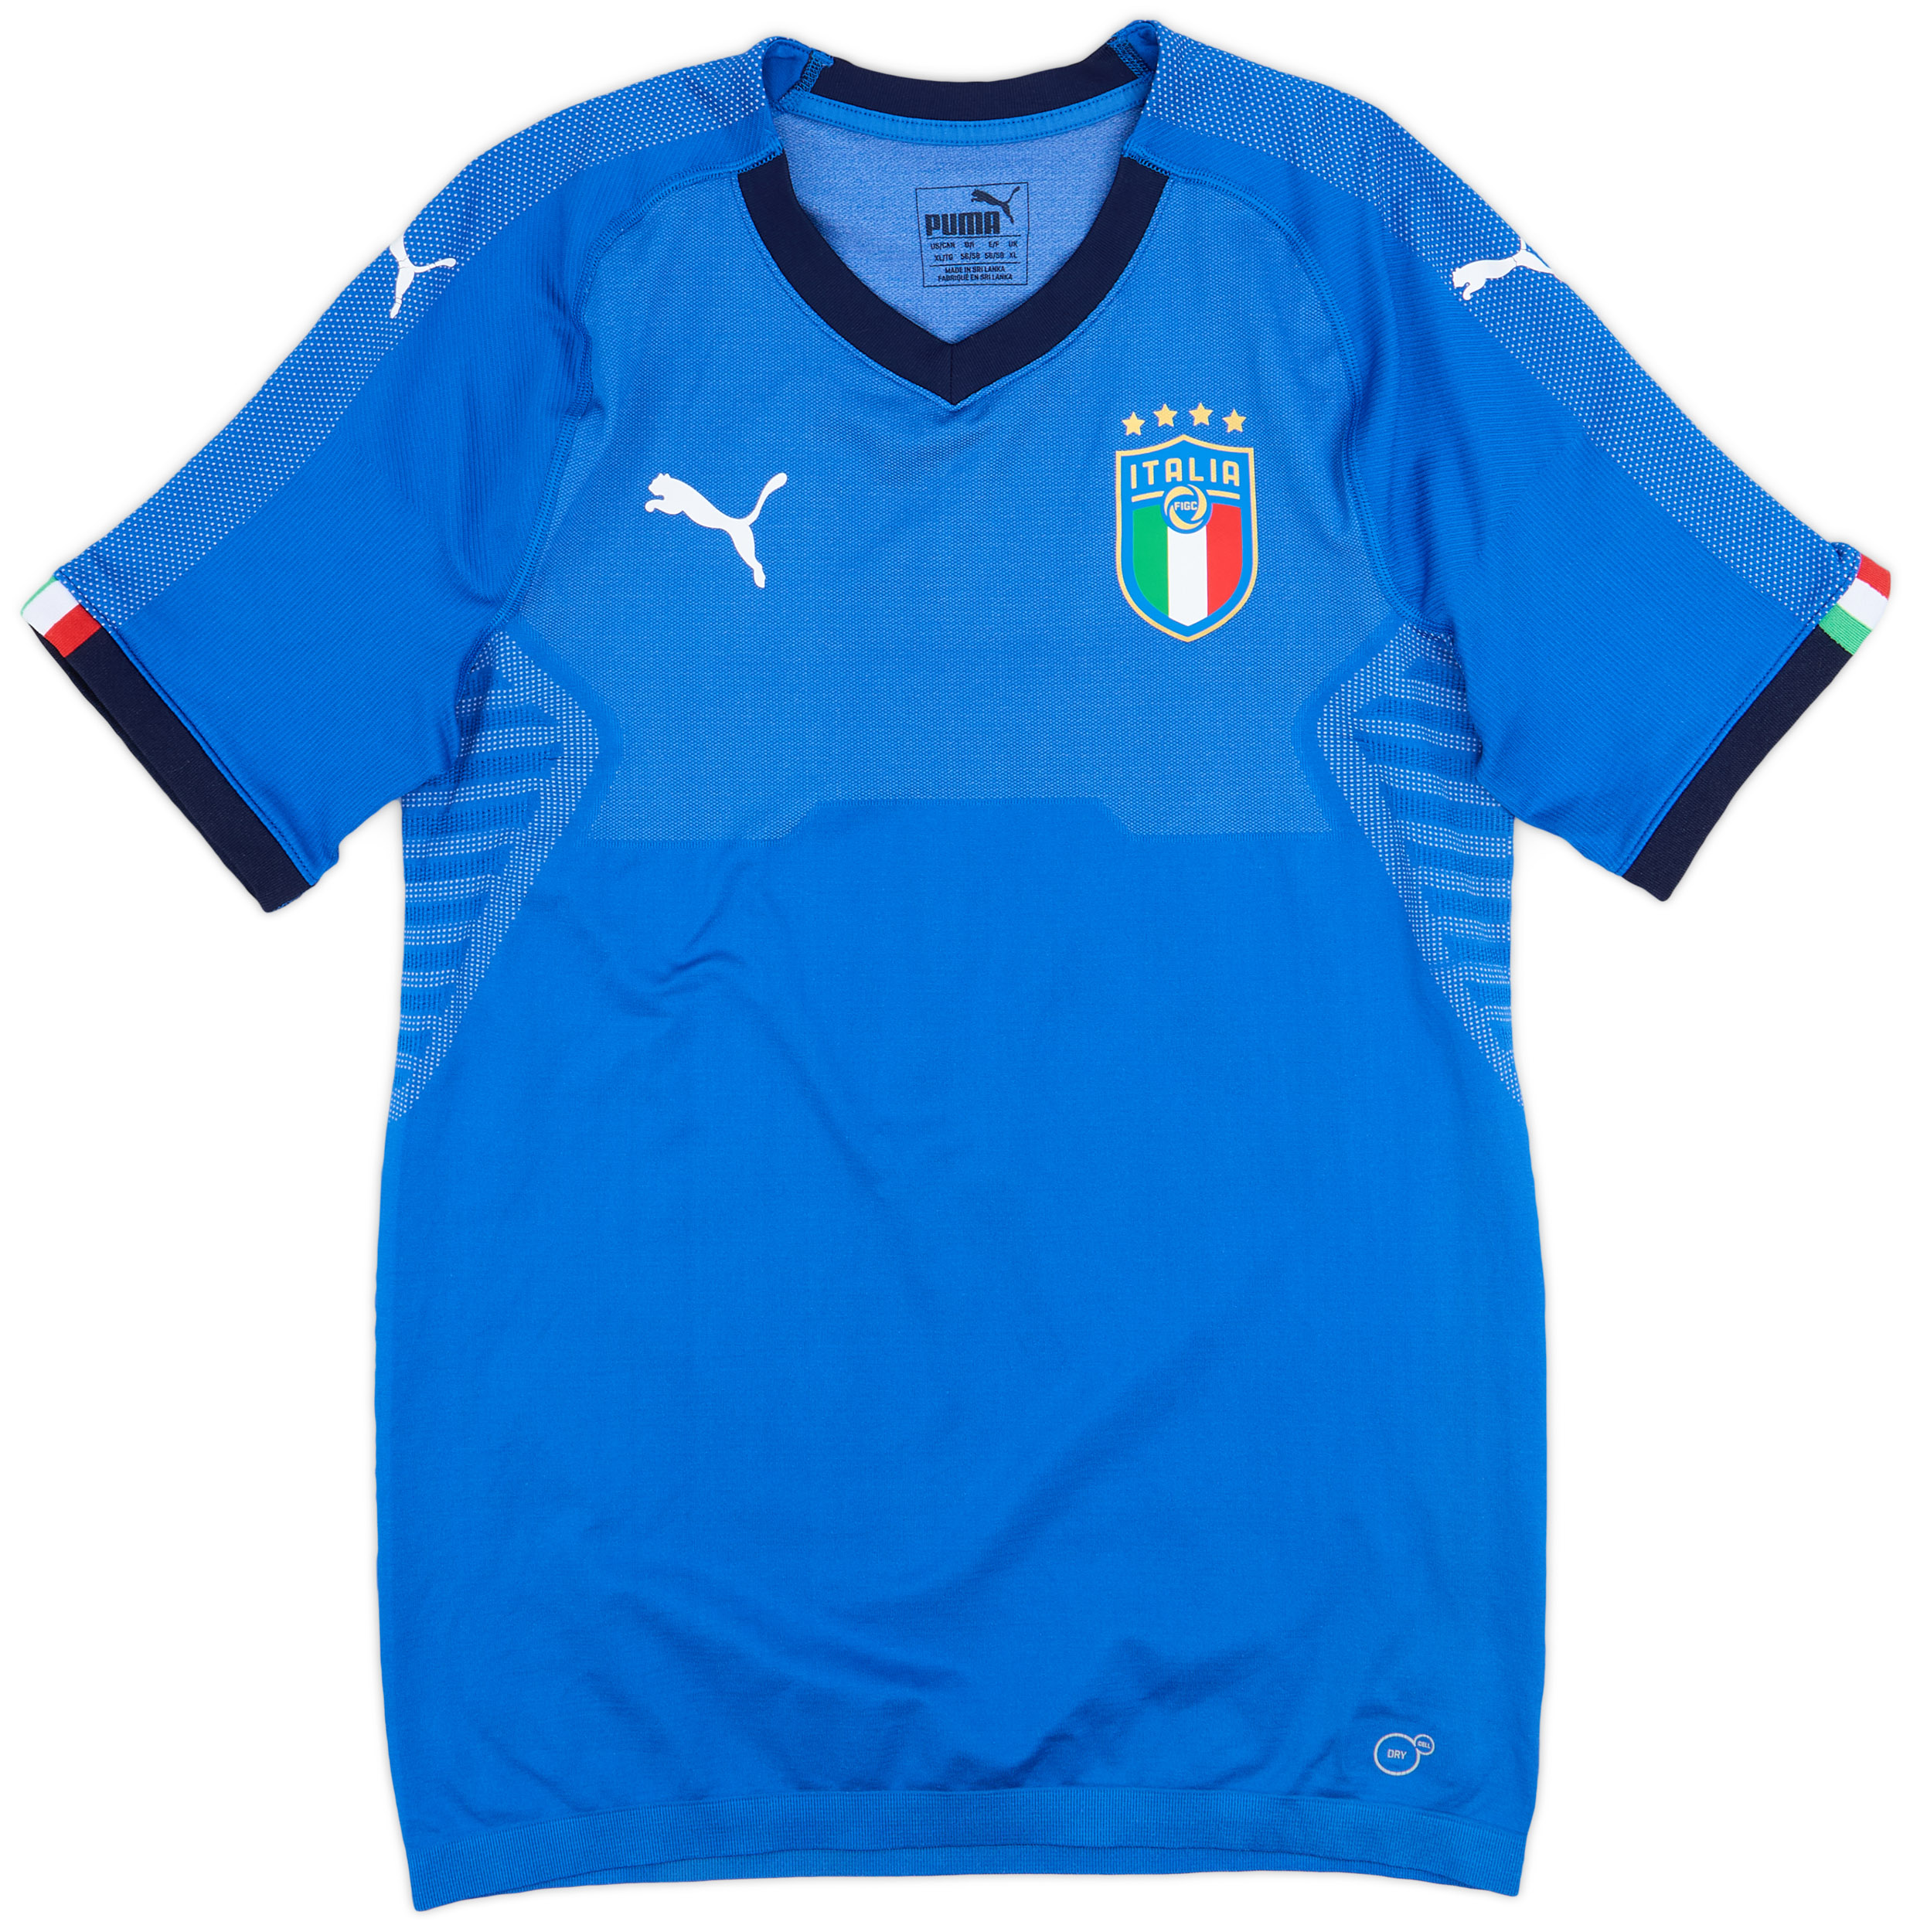 2018-19 Italy Authentic Home Shirt - 8/10 - ()